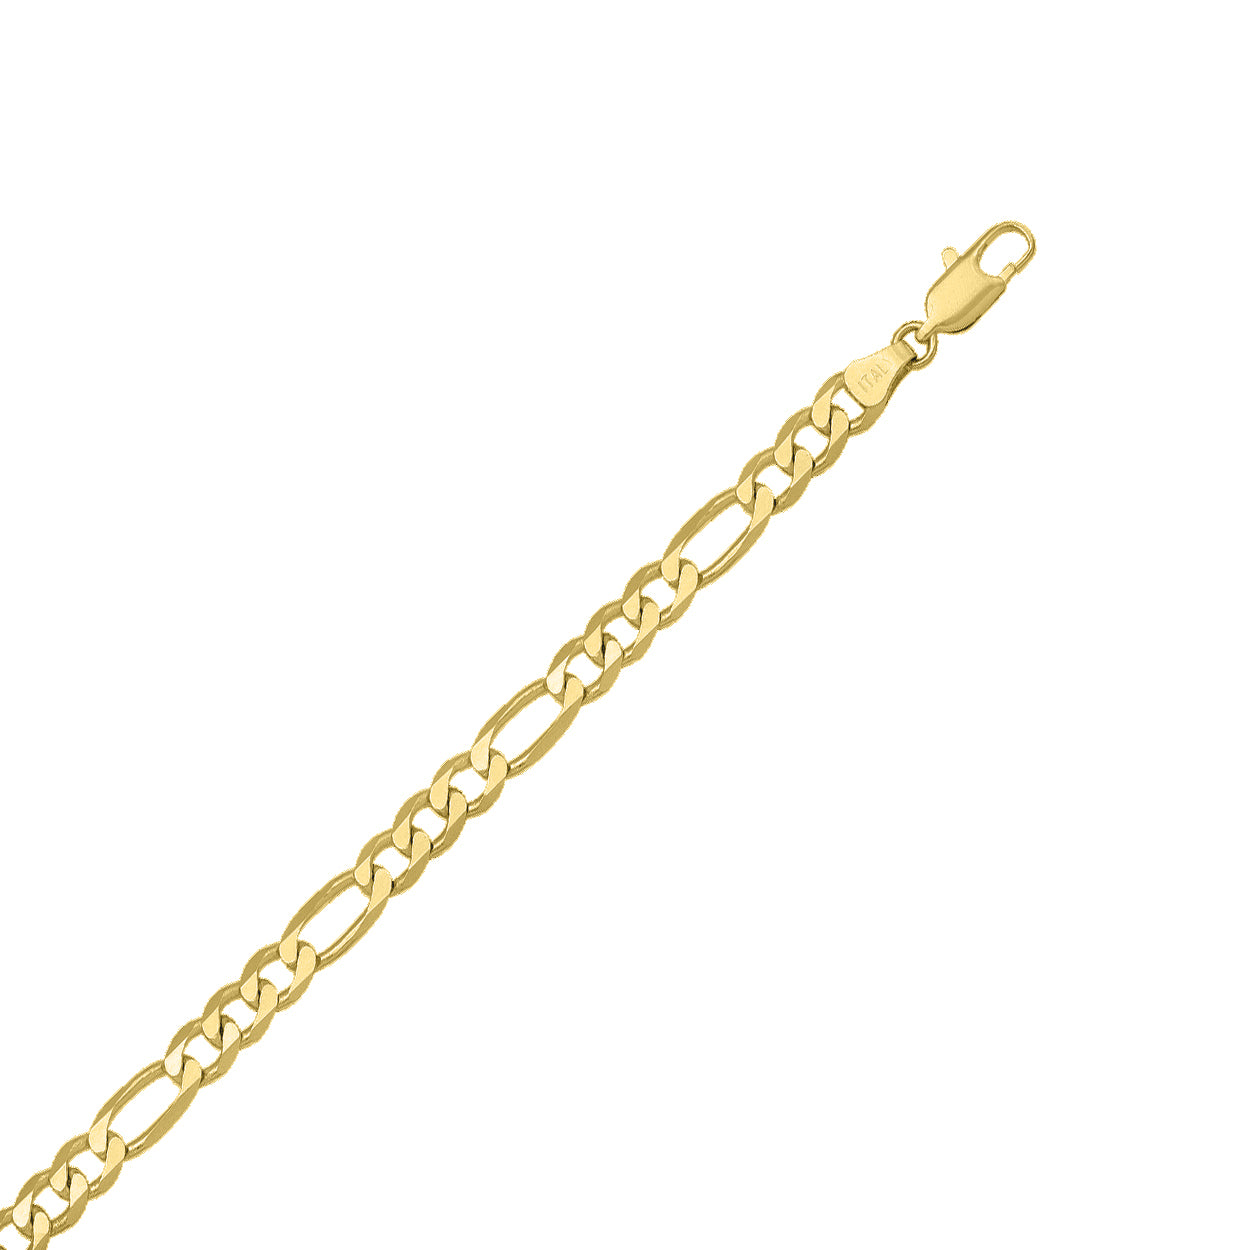 18kt Yellow Gold Figaro Style Bracelet with 5mm Width